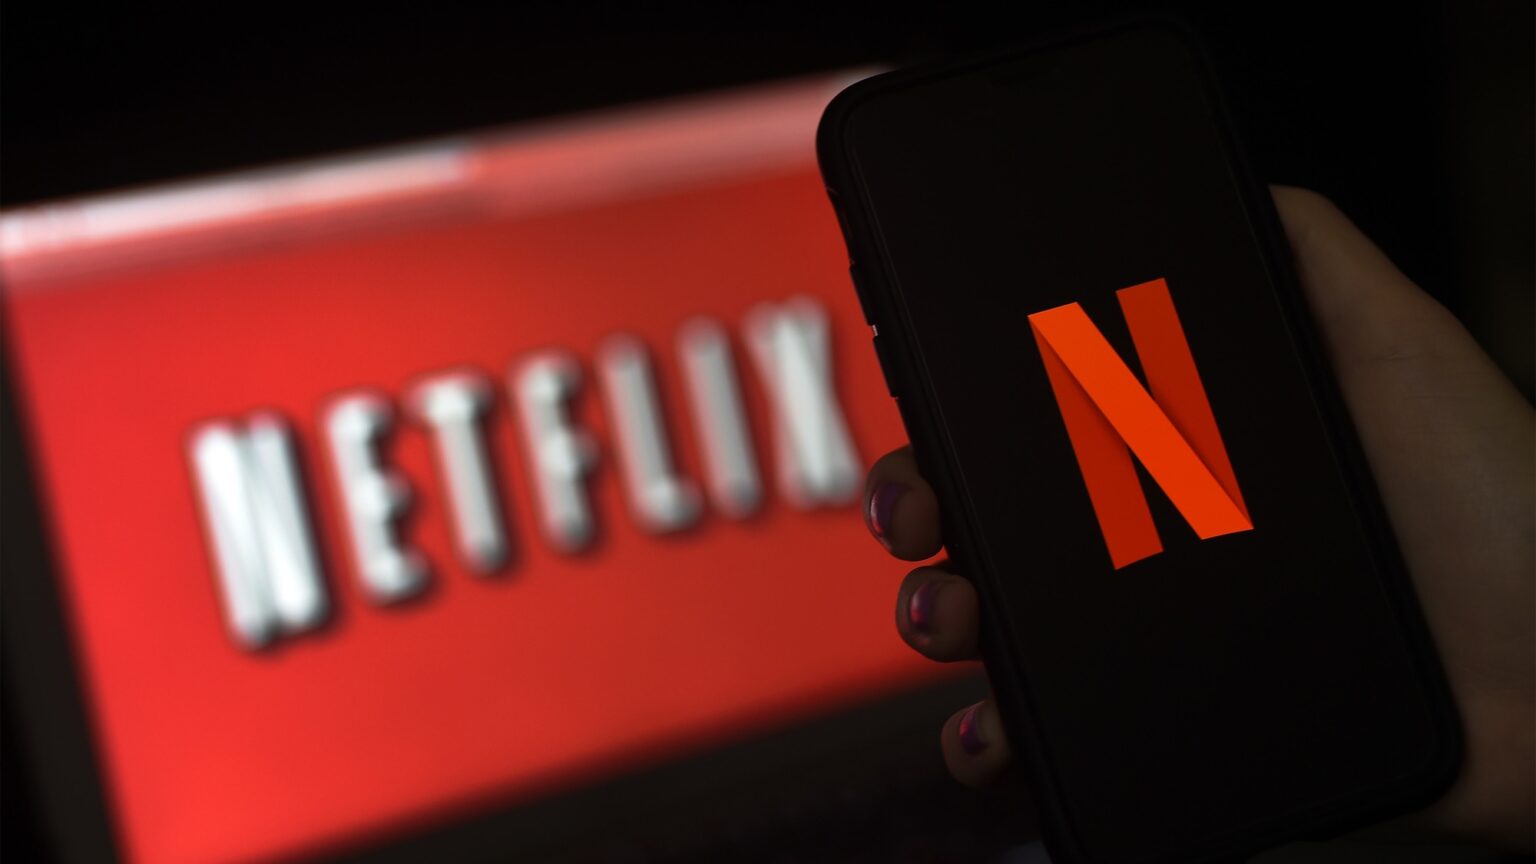 Prepare to wince – the price of Netflix subscriptions is going up again. Here's a look into why Netflix raises their prices.